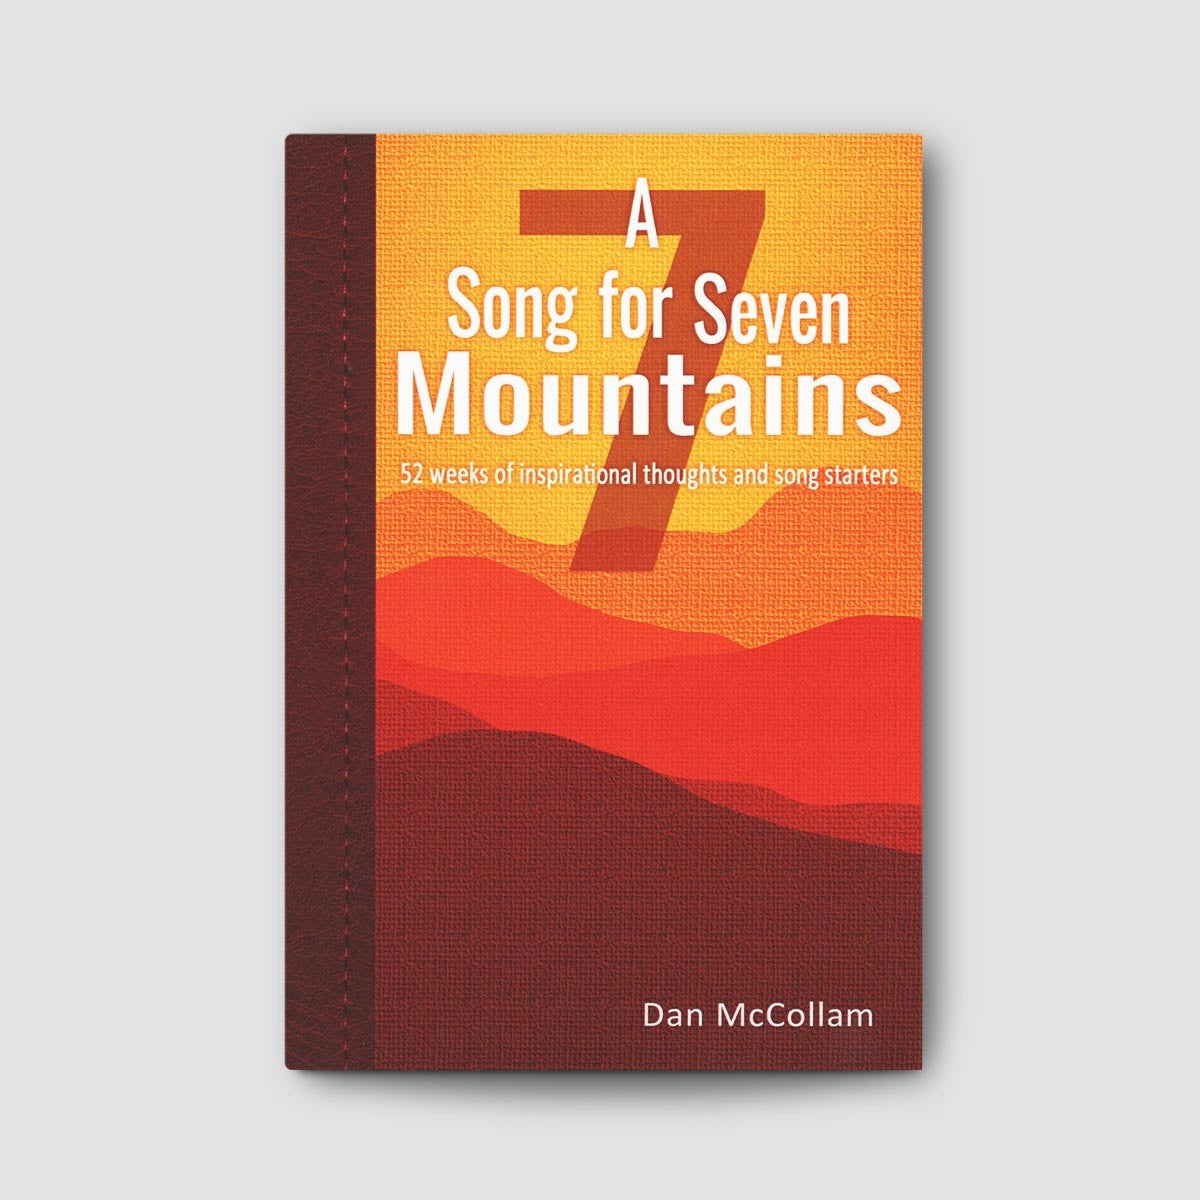 A Song for Seven Mountains